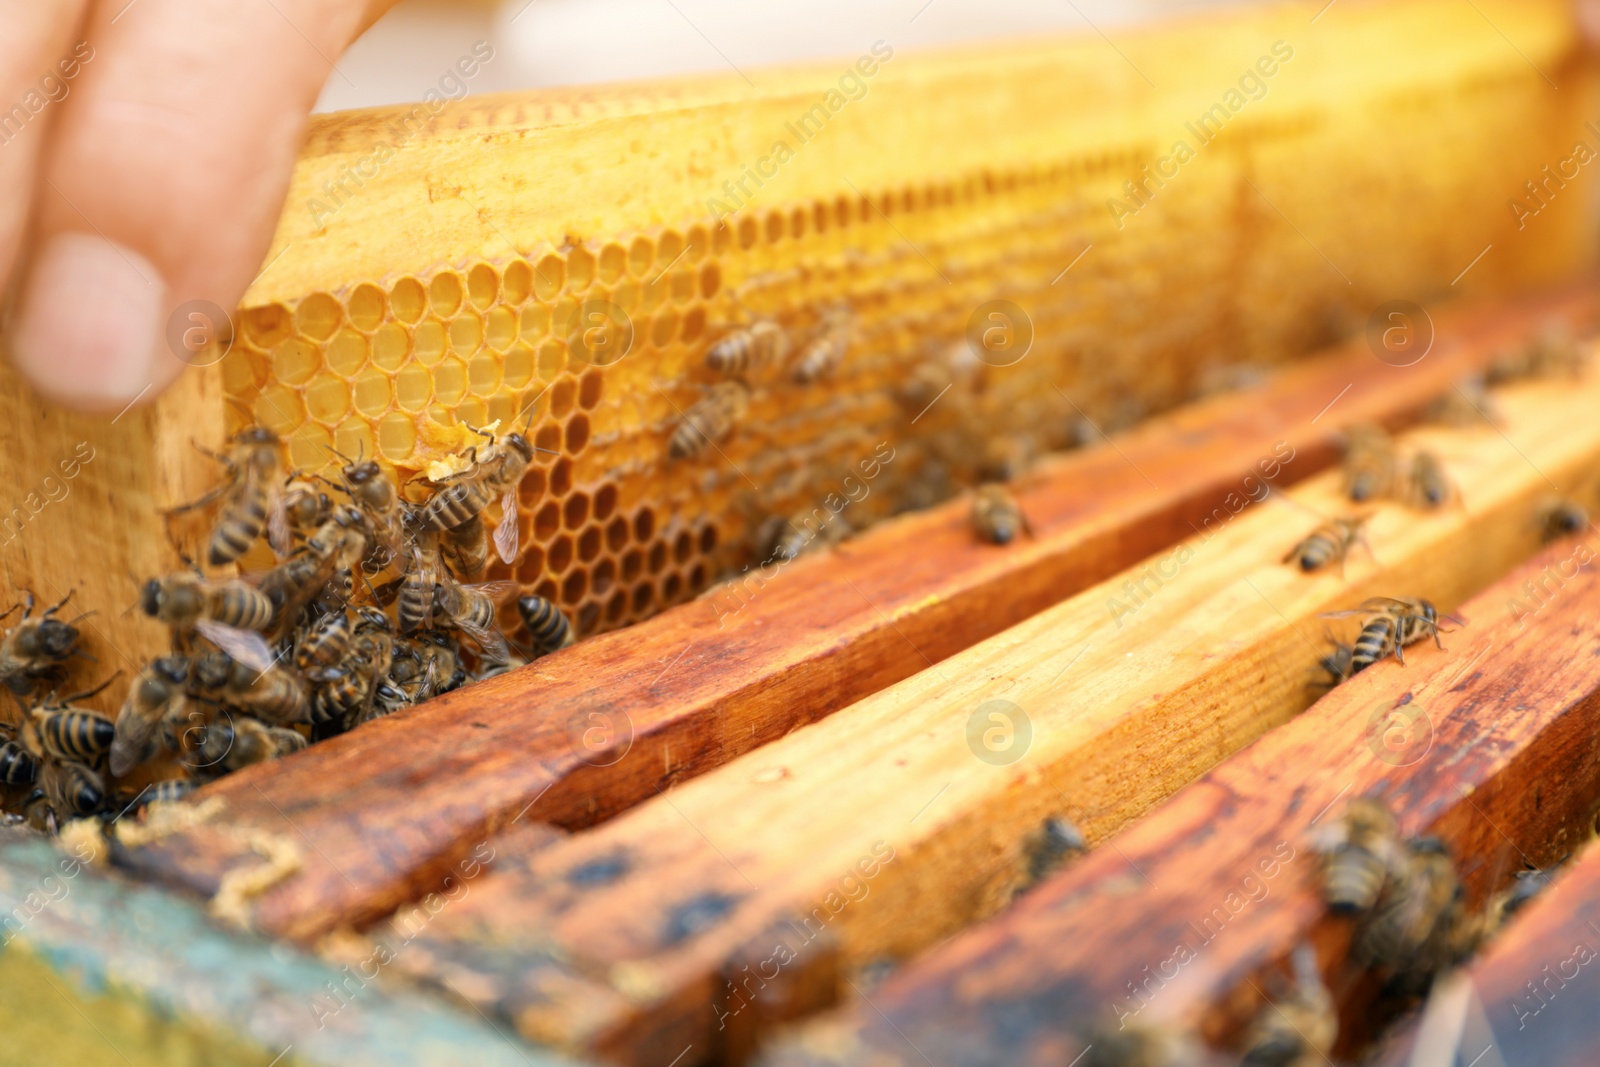 Photo of Beekeeper taking frame from hive at apiary, closeup. Harvesting honey